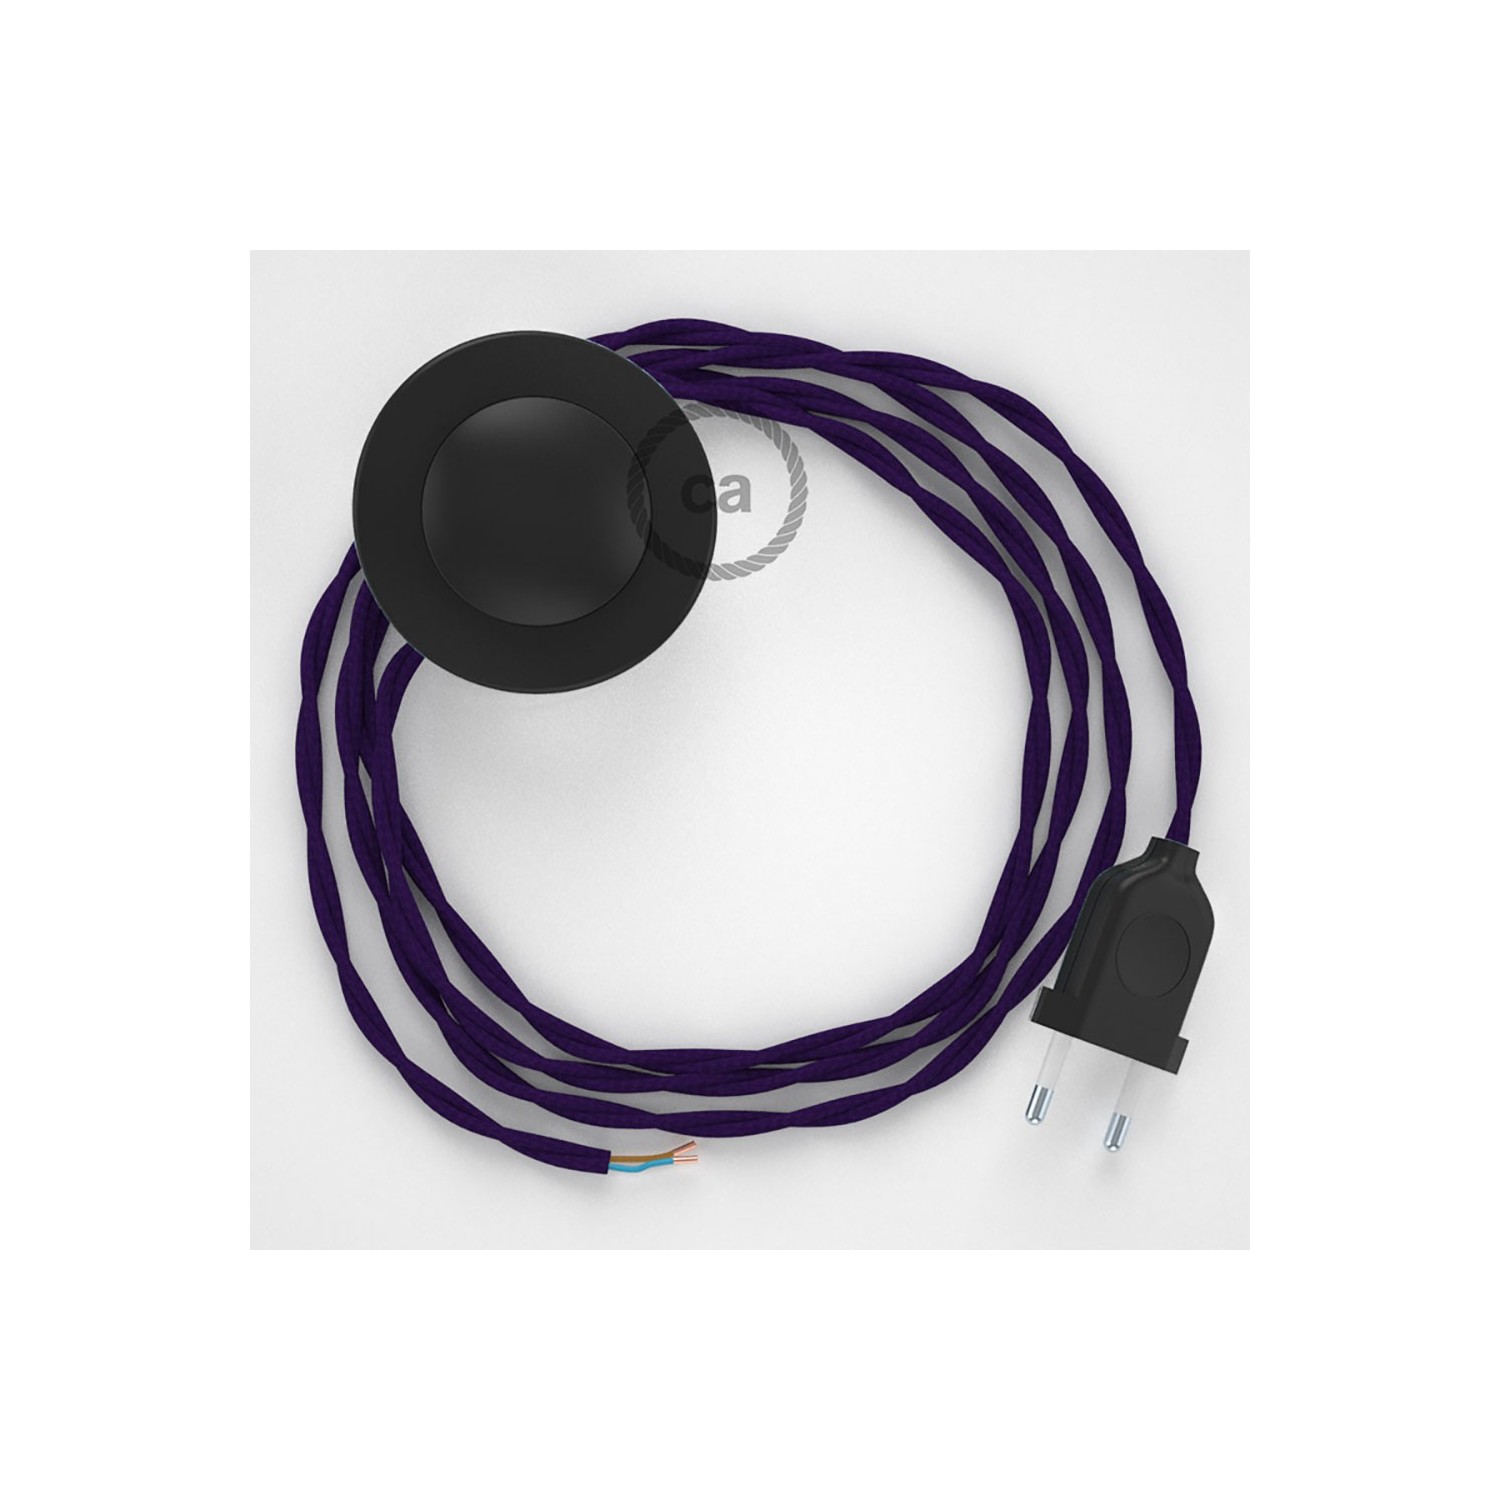 Wiring Pedestal, TM14 Purple Rayon 3 m. Choose the colour of the switch and plug.